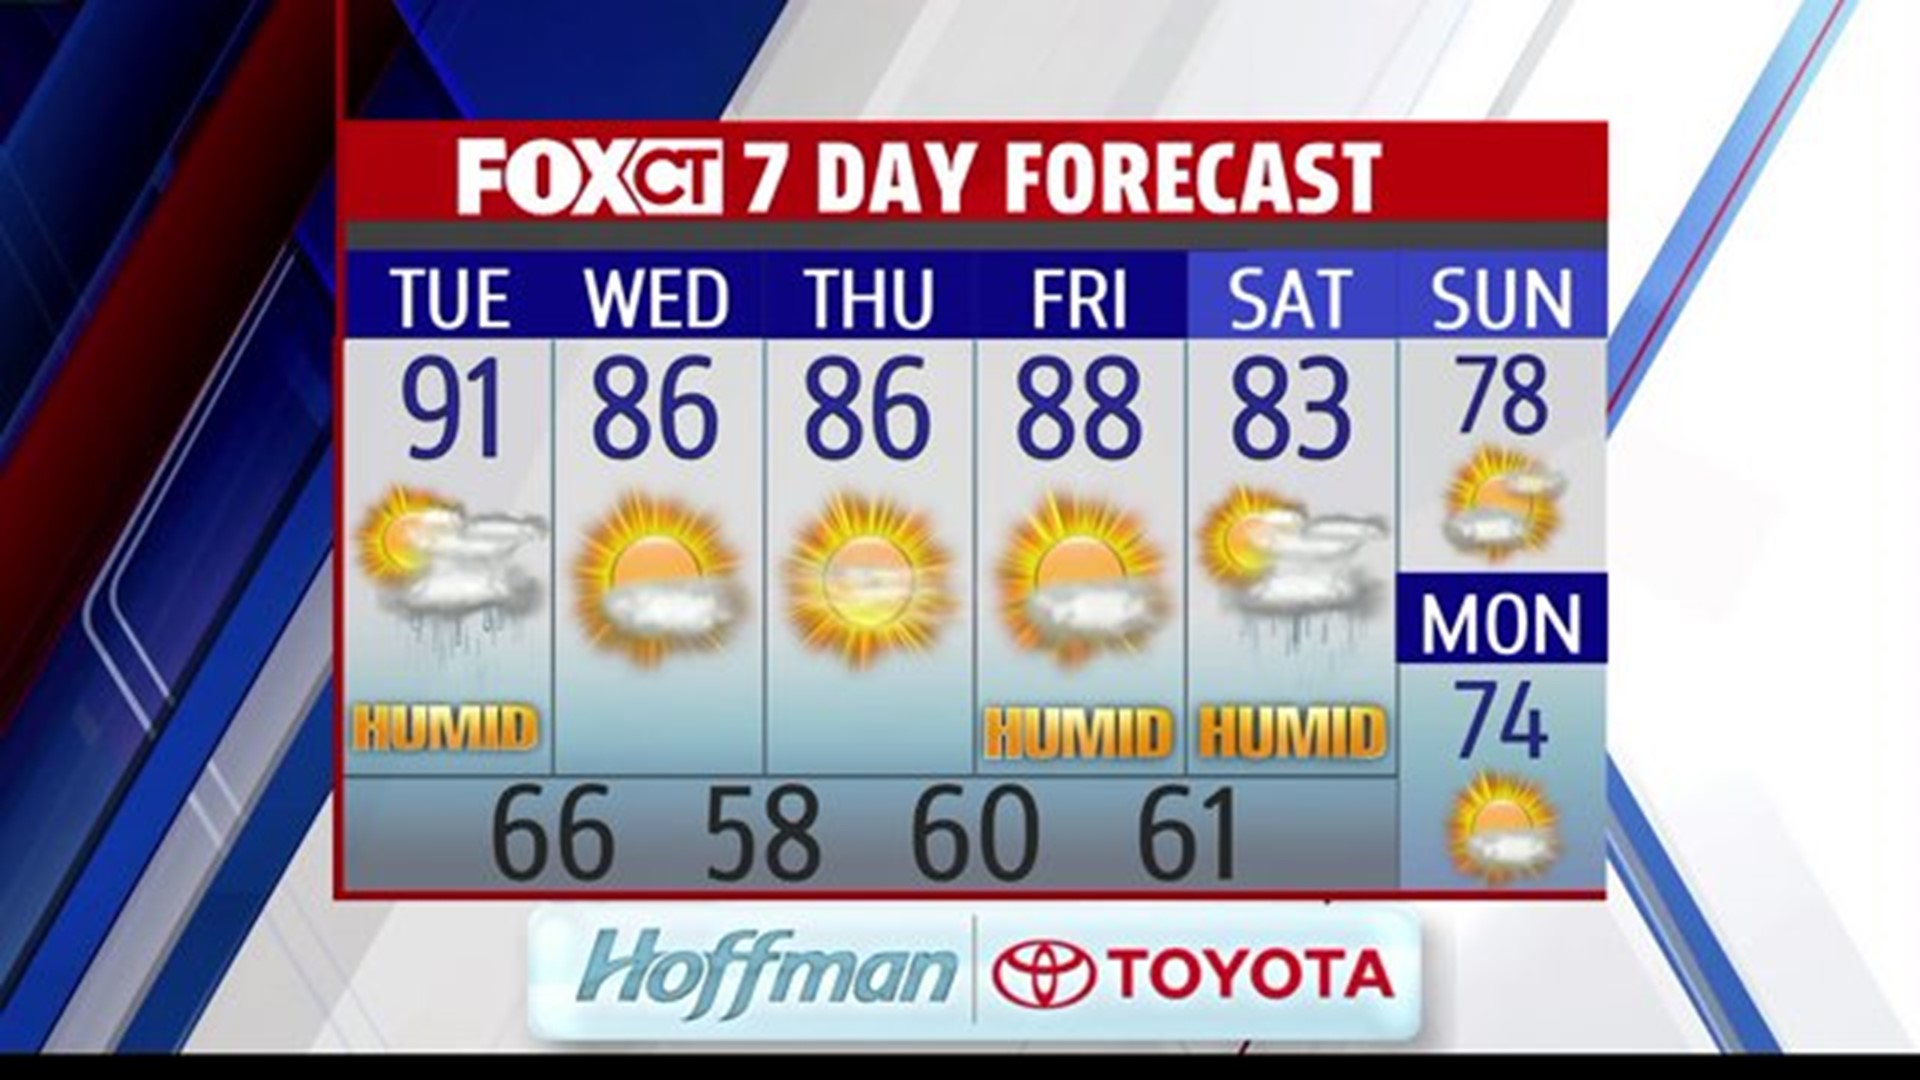 Tuesday AM Weather: Summer Feel This Week